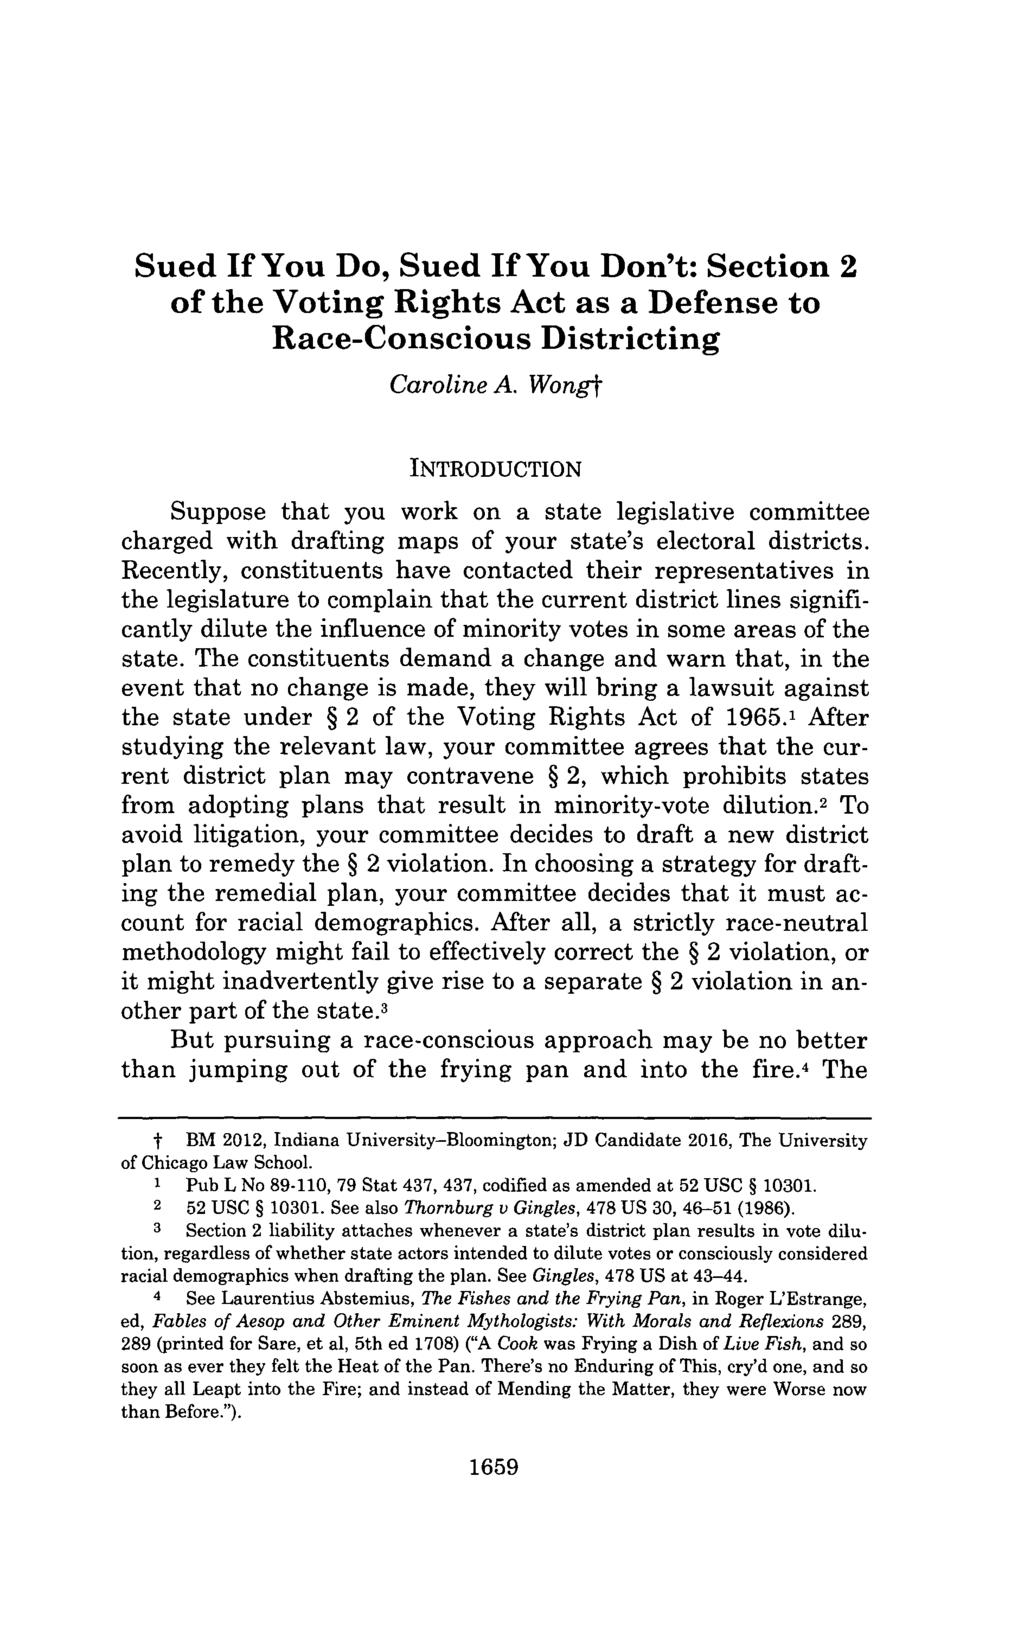 Sued If You Do, Sued If You Don't: Section 2 of the Voting Rights Act as a Defense to Race-Conscious Districting Caroline A.